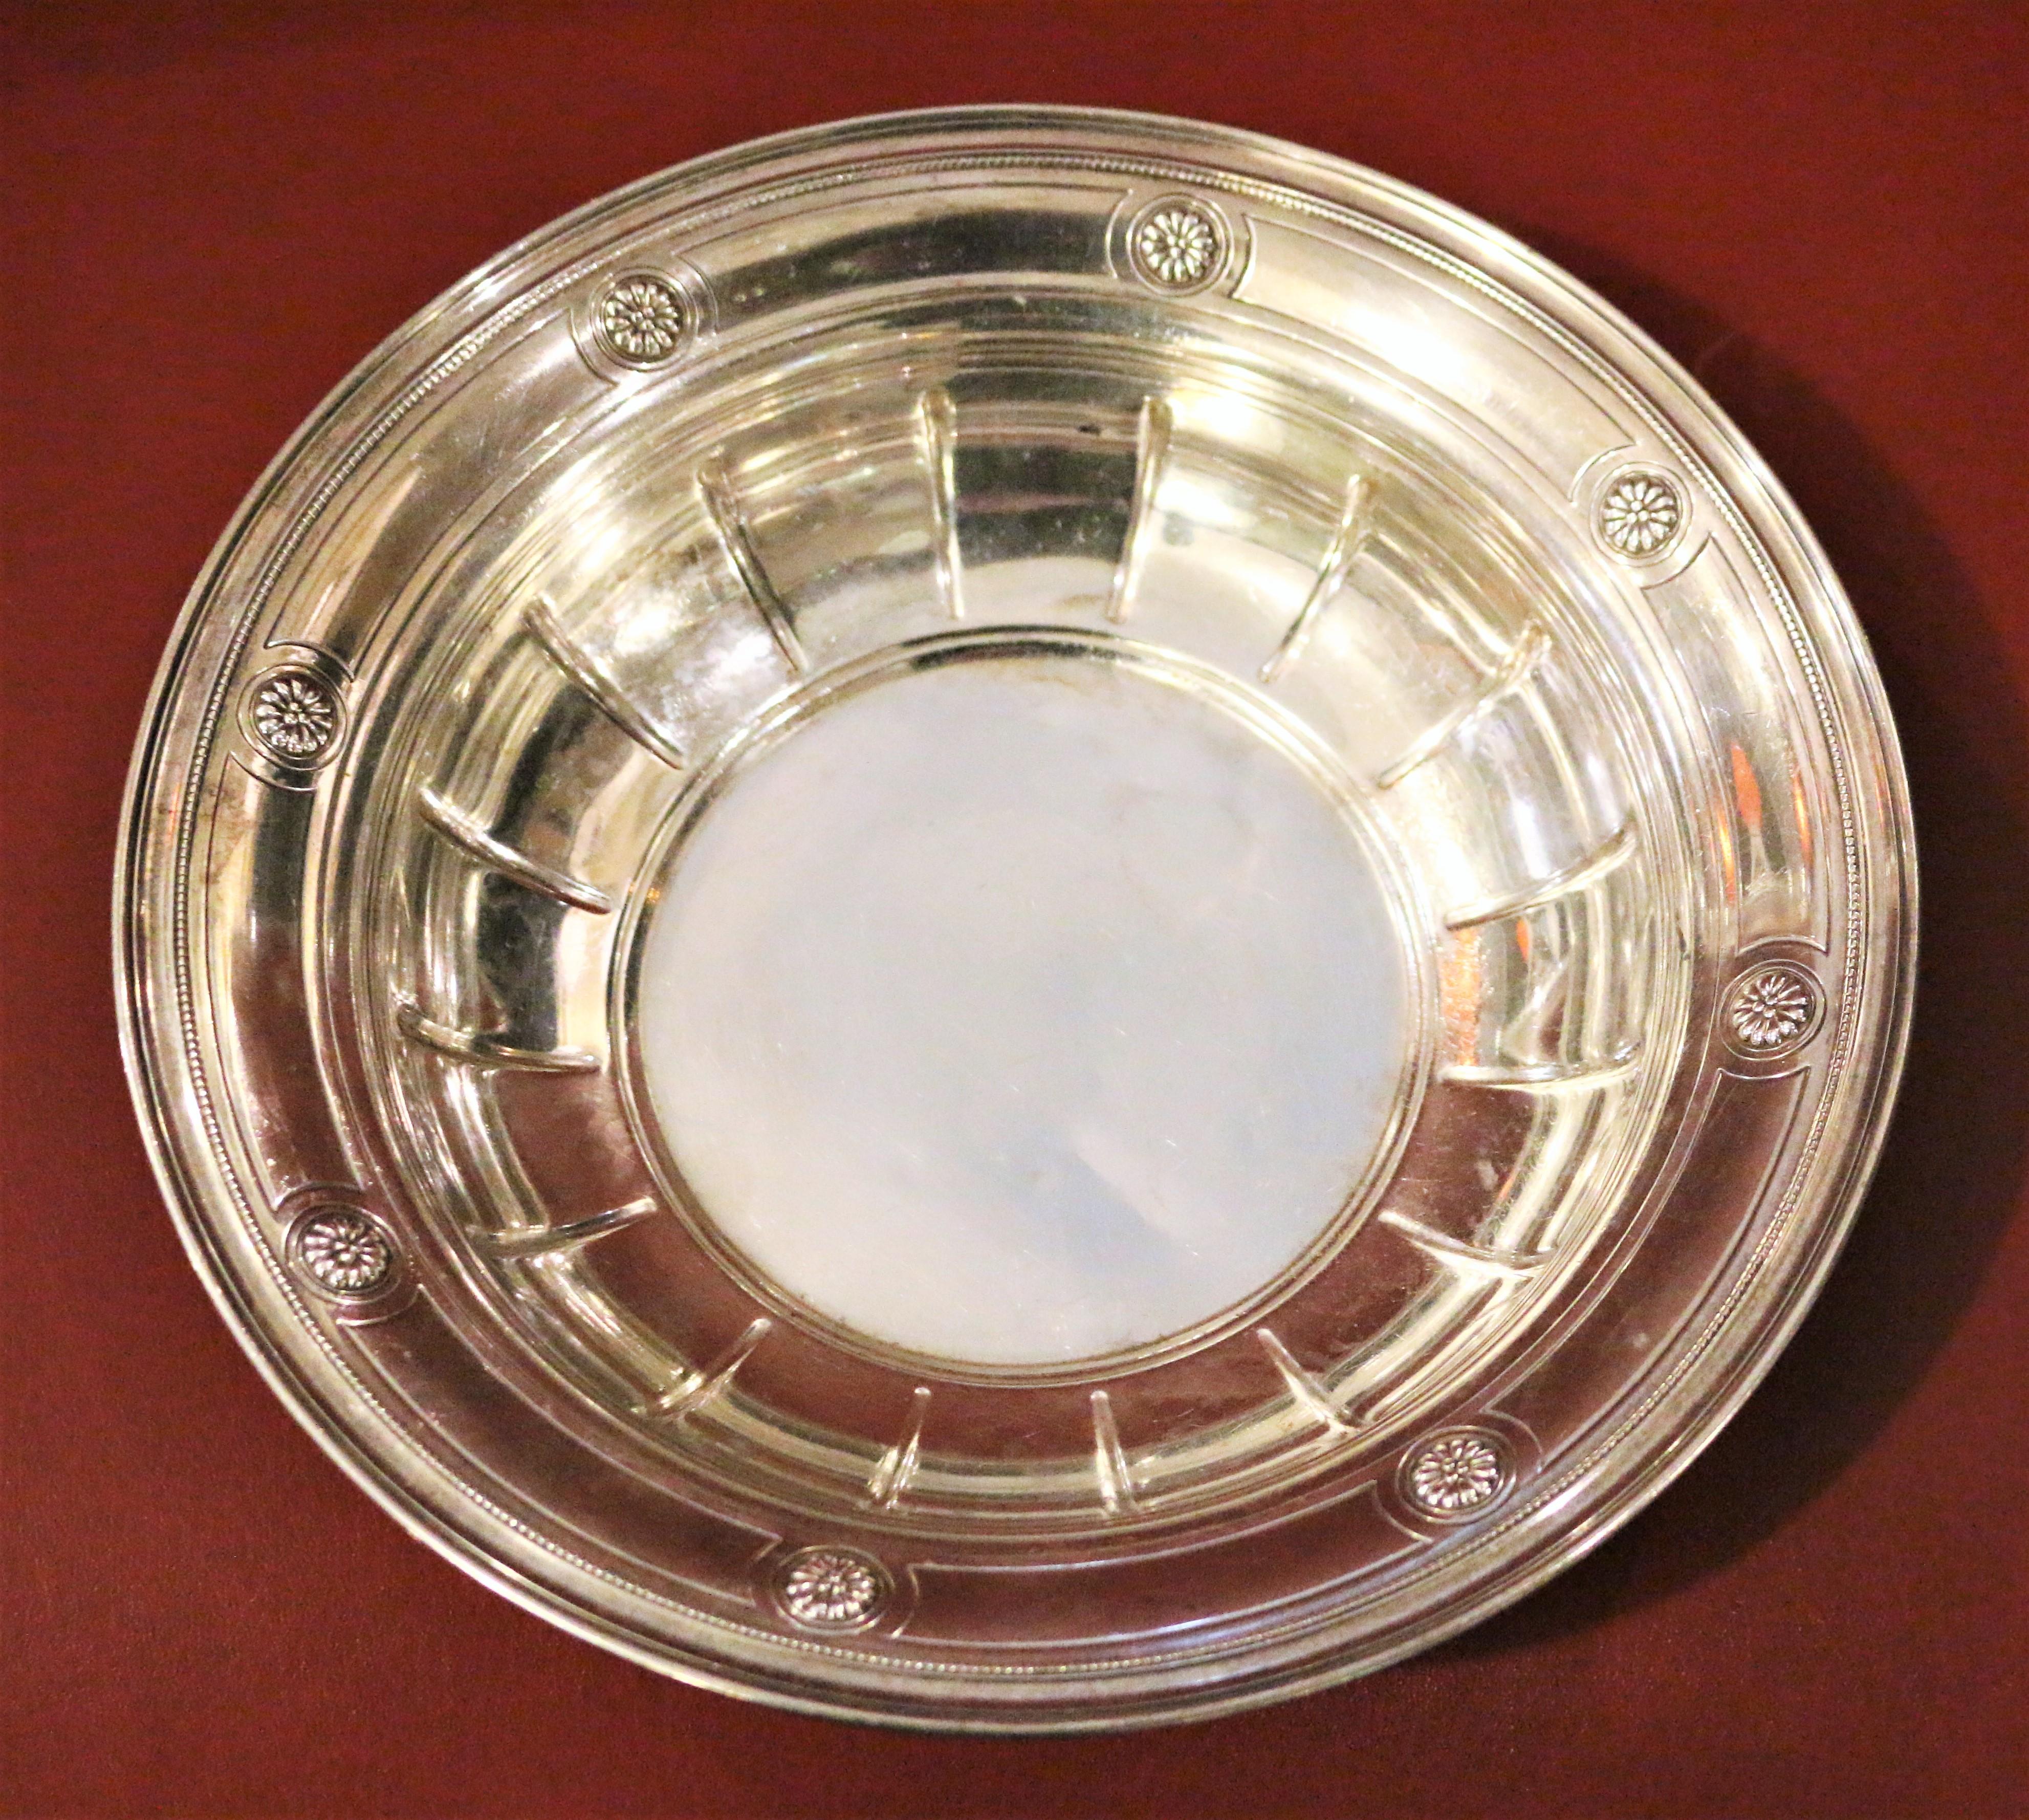 1920s Tiffany & Co. Sterling Silver Bowl or Dish For Sale 2